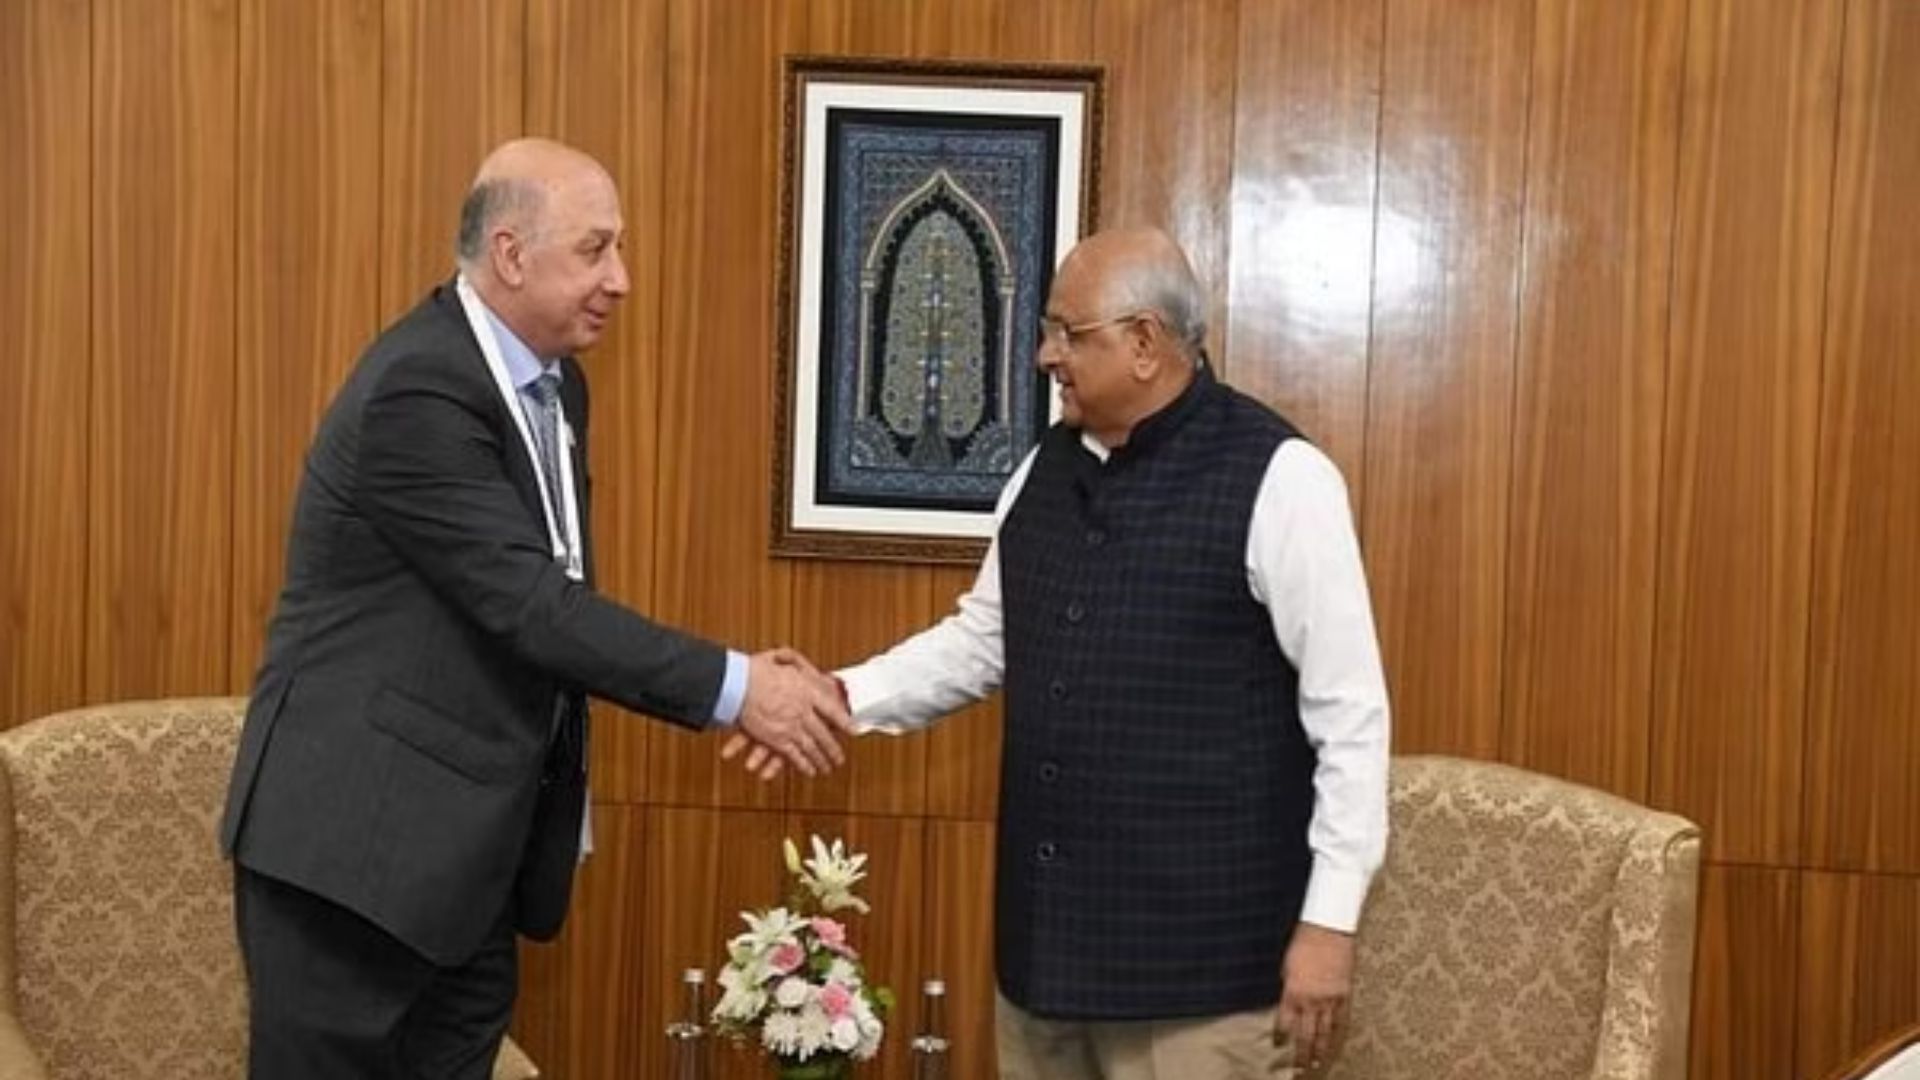 Gujarat Chief Minister Bhupendra Patel looks into working with the New Development Bank